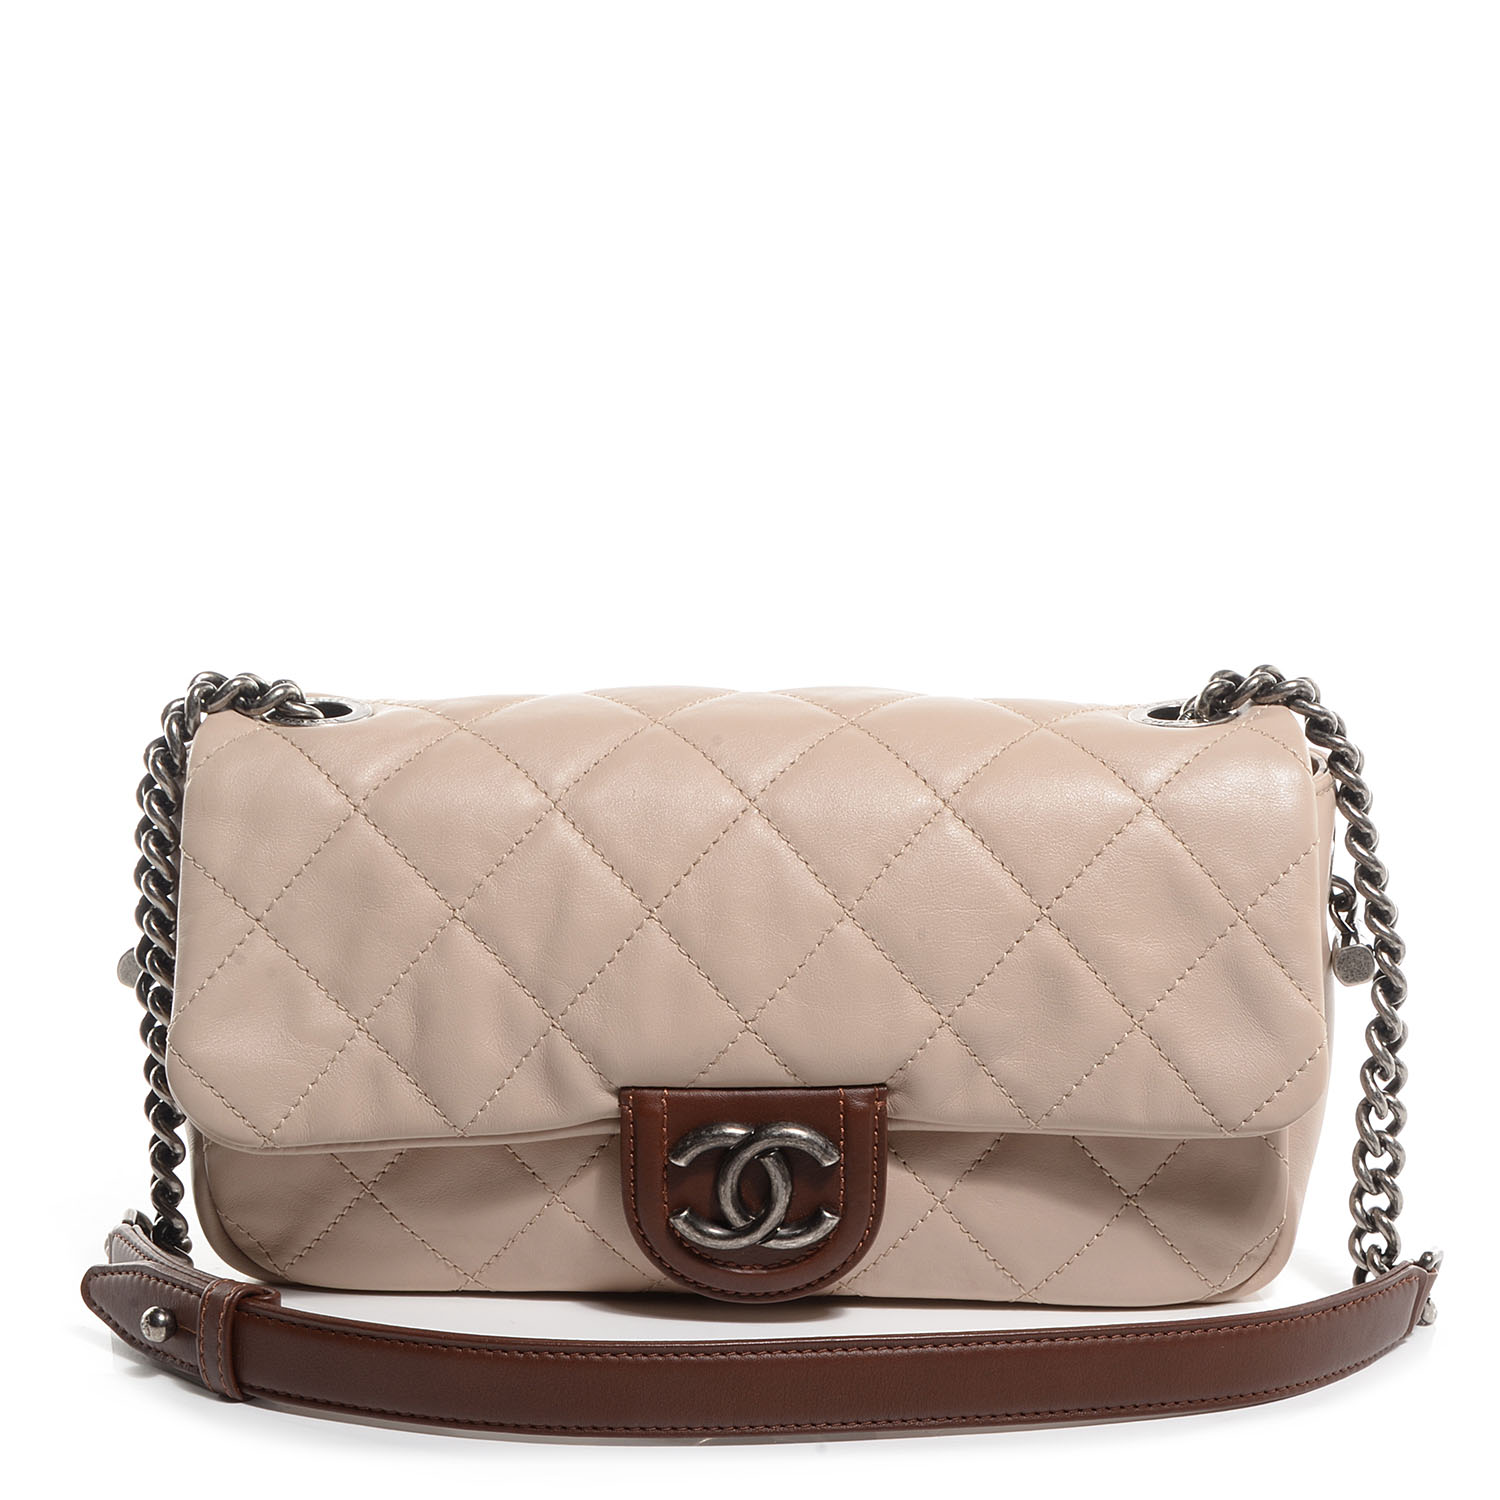 Chanel Country Chic Flap Bag La France, SAVE 31% 